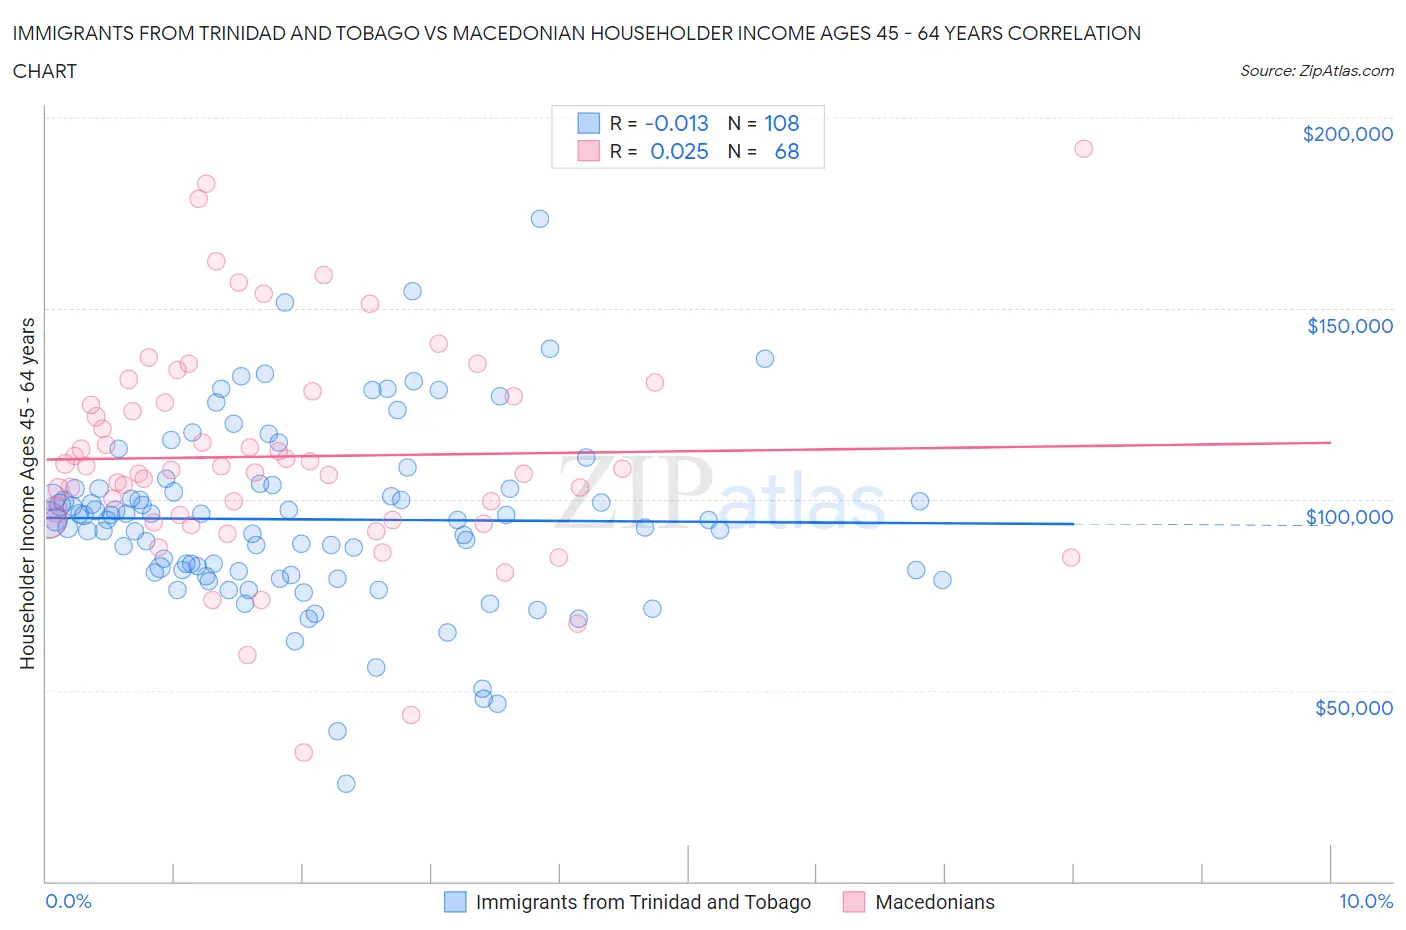 Immigrants from Trinidad and Tobago vs Macedonian Householder Income Ages 45 - 64 years